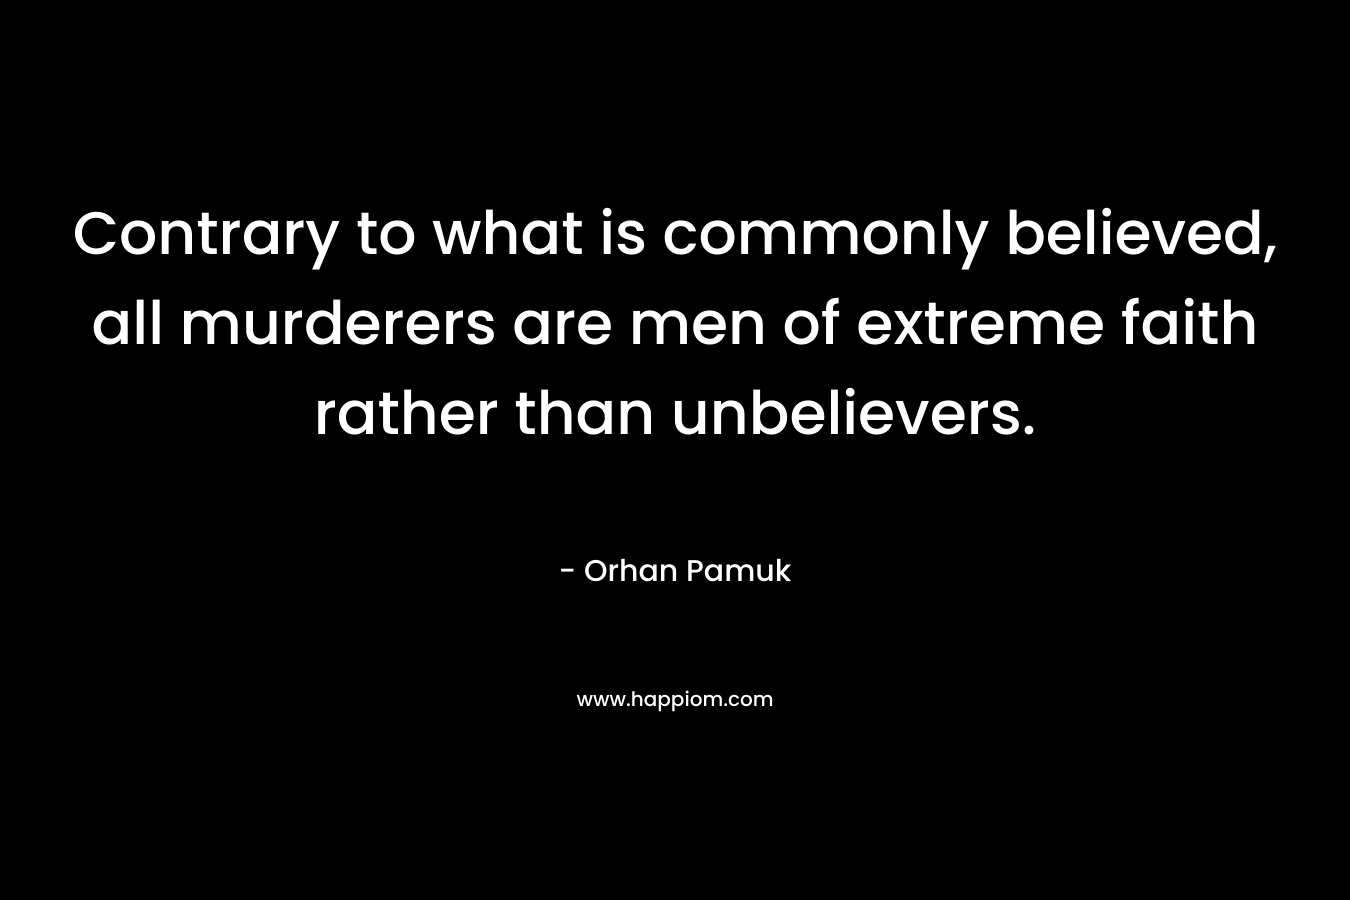 Contrary to what is commonly believed, all murderers are men of extreme faith rather than unbelievers.